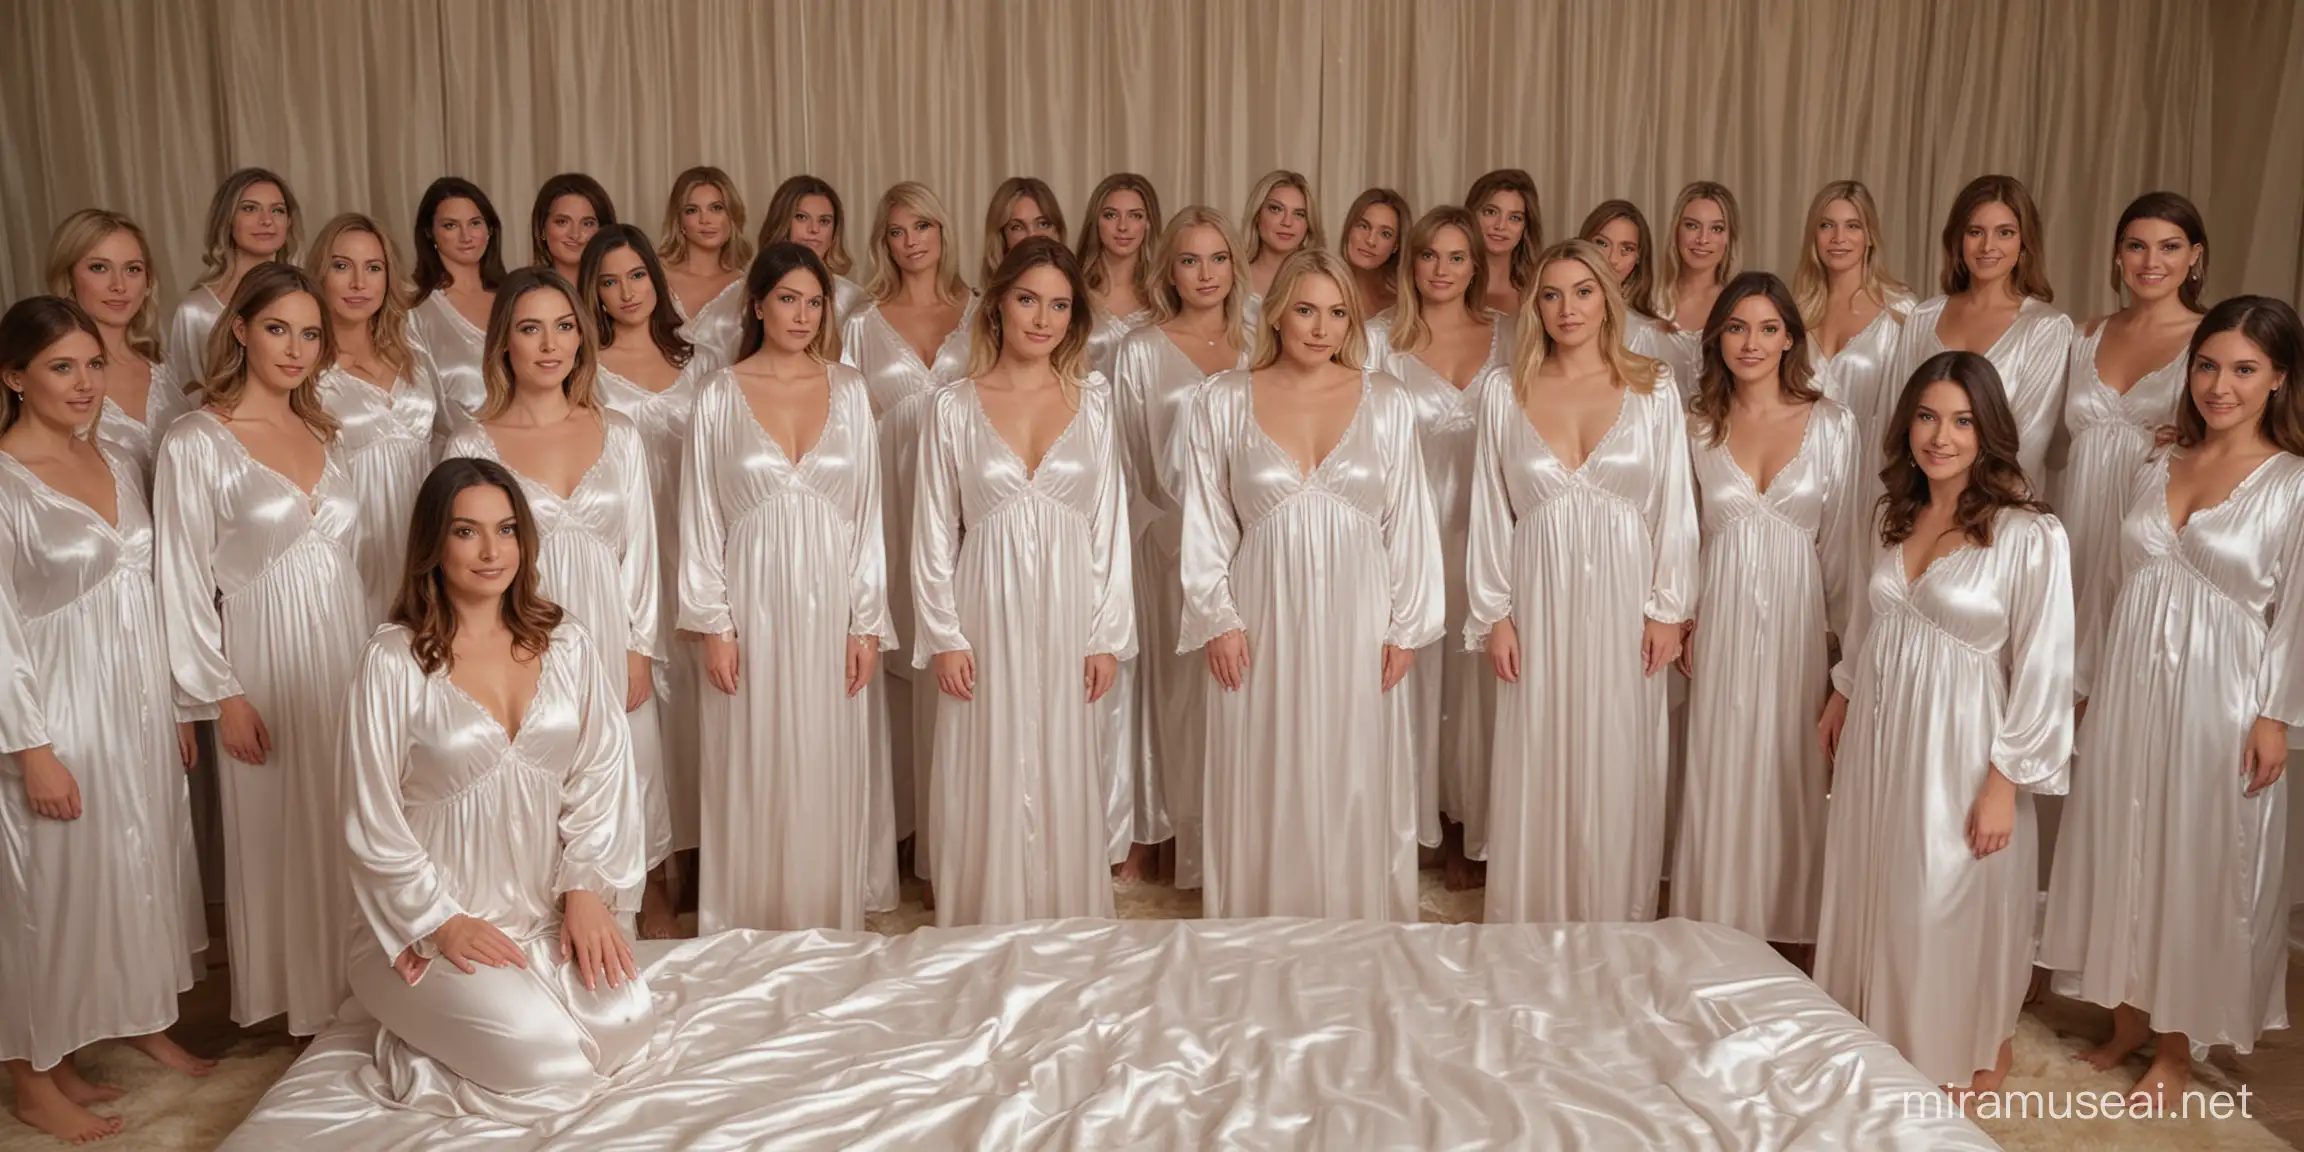 30 Women in Milky Satin Nightgowns Standing on Giant Bed